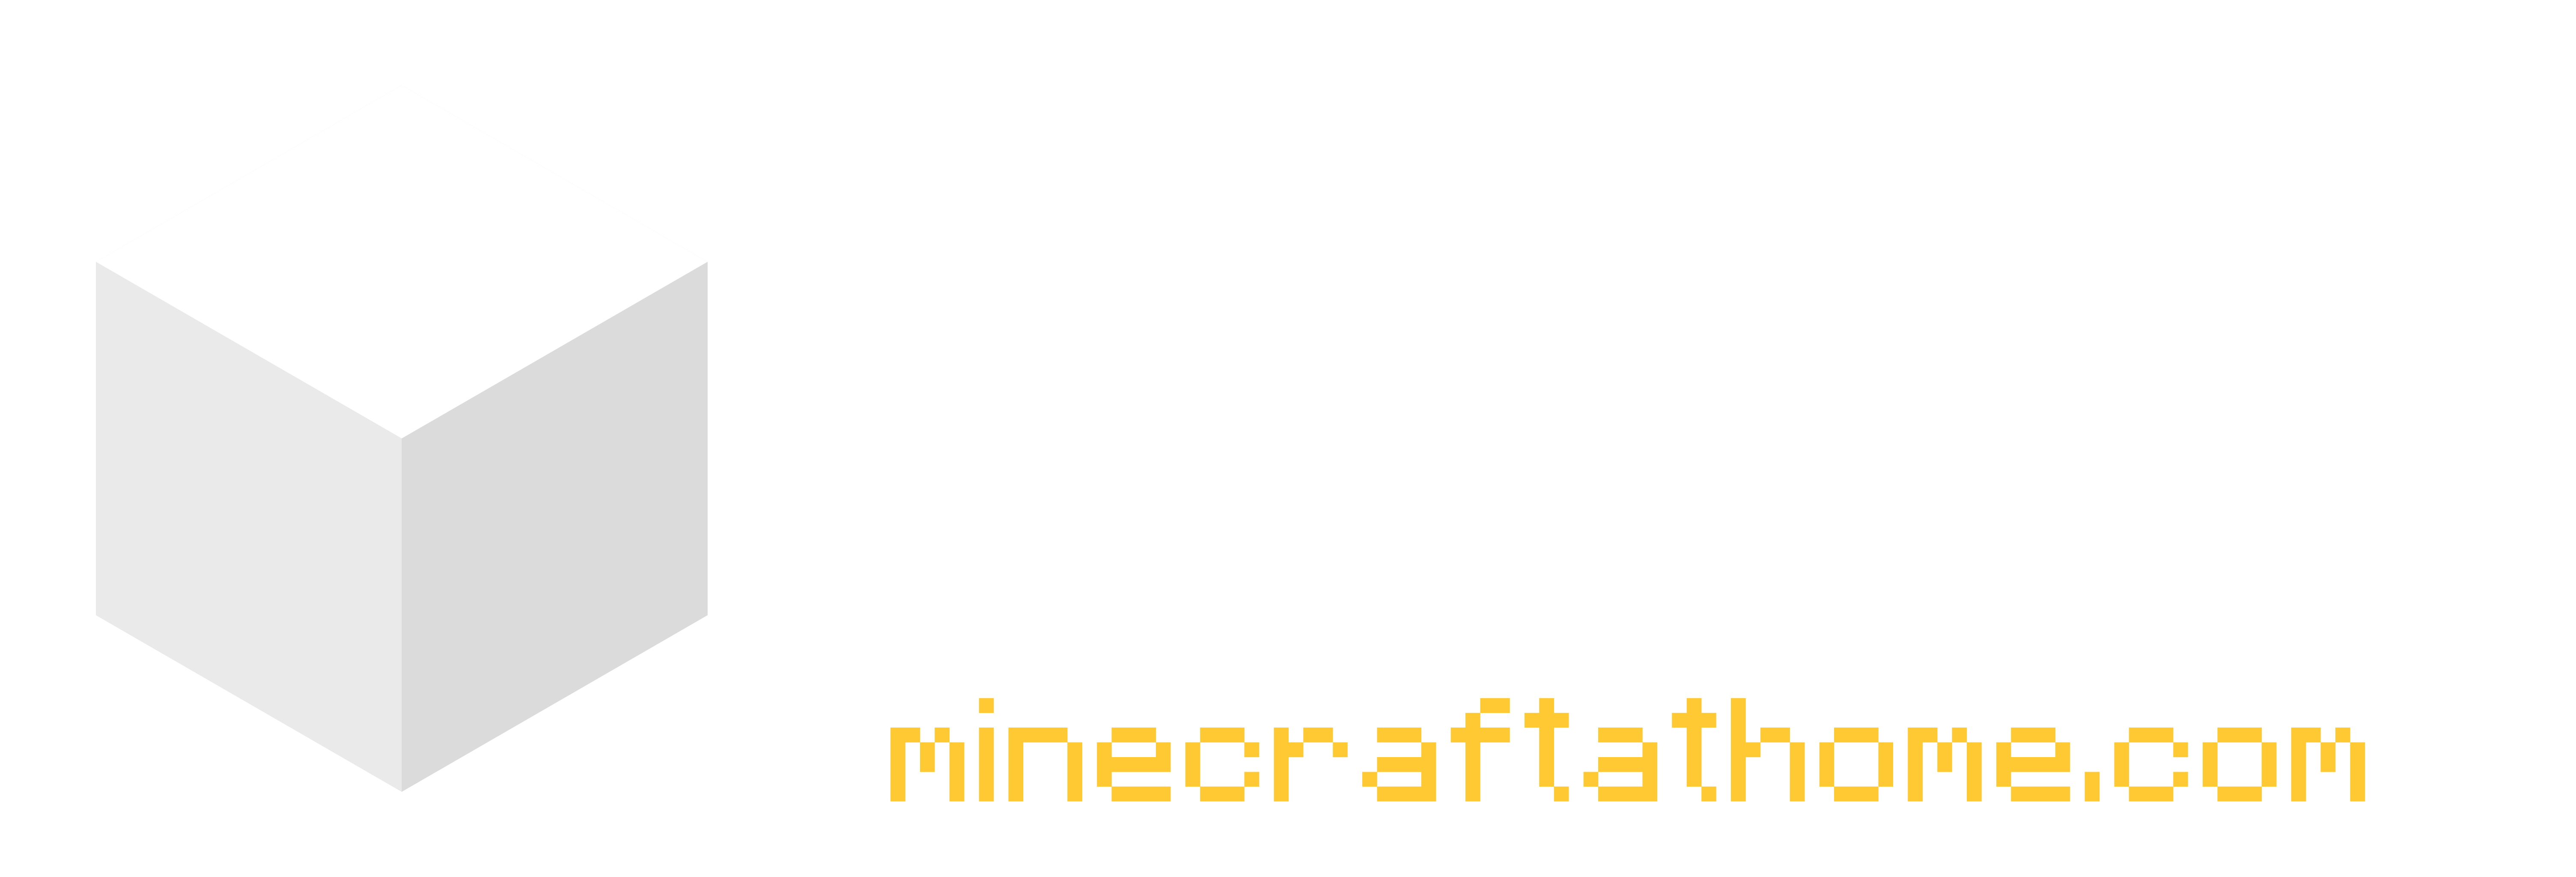 Full white version of the Minecraft@Home logo with a yellow link to minecraftathome.com